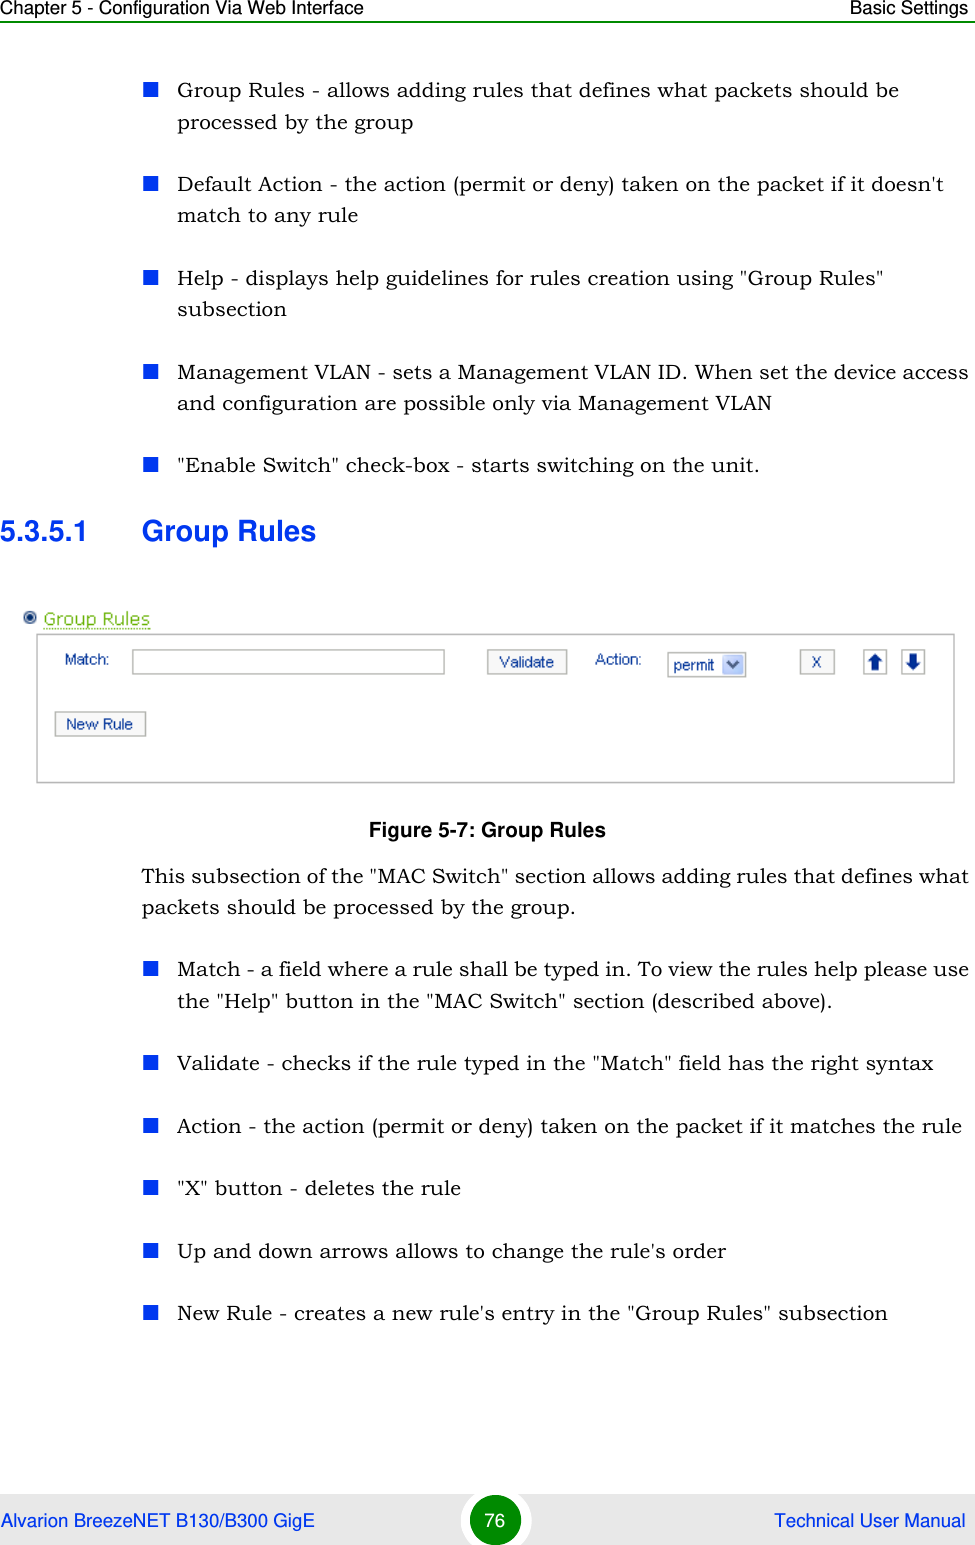 Chapter 5 - Configuration Via Web Interface Basic SettingsAlvarion BreezeNET B130/B300 GigE 76  Technical User ManualGroup Rules - allows adding rules that defines what packets should be processed by the groupDefault Action - the action (permit or deny) taken on the packet if it doesn&apos;t match to any rule Help - displays help guidelines for rules creation using &quot;Group Rules&quot; subsectionManagement VLAN - sets a Management VLAN ID. When set the device access and configuration are possible only via Management VLAN&quot;Enable Switch&quot; check-box - starts switching on the unit.5.3.5.1 Group RulesThis subsection of the &quot;MAC Switch&quot; section allows adding rules that defines what packets should be processed by the group.Match - a field where a rule shall be typed in. To view the rules help please use the &quot;Help&quot; button in the &quot;MAC Switch&quot; section (described above).Validate - checks if the rule typed in the &quot;Match&quot; field has the right syntaxAction - the action (permit or deny) taken on the packet if it matches the rule&quot;X&quot; button - deletes the ruleUp and down arrows allows to change the rule&apos;s orderNew Rule - creates a new rule&apos;s entry in the &quot;Group Rules&quot; subsectionFigure 5-7: Group Rules